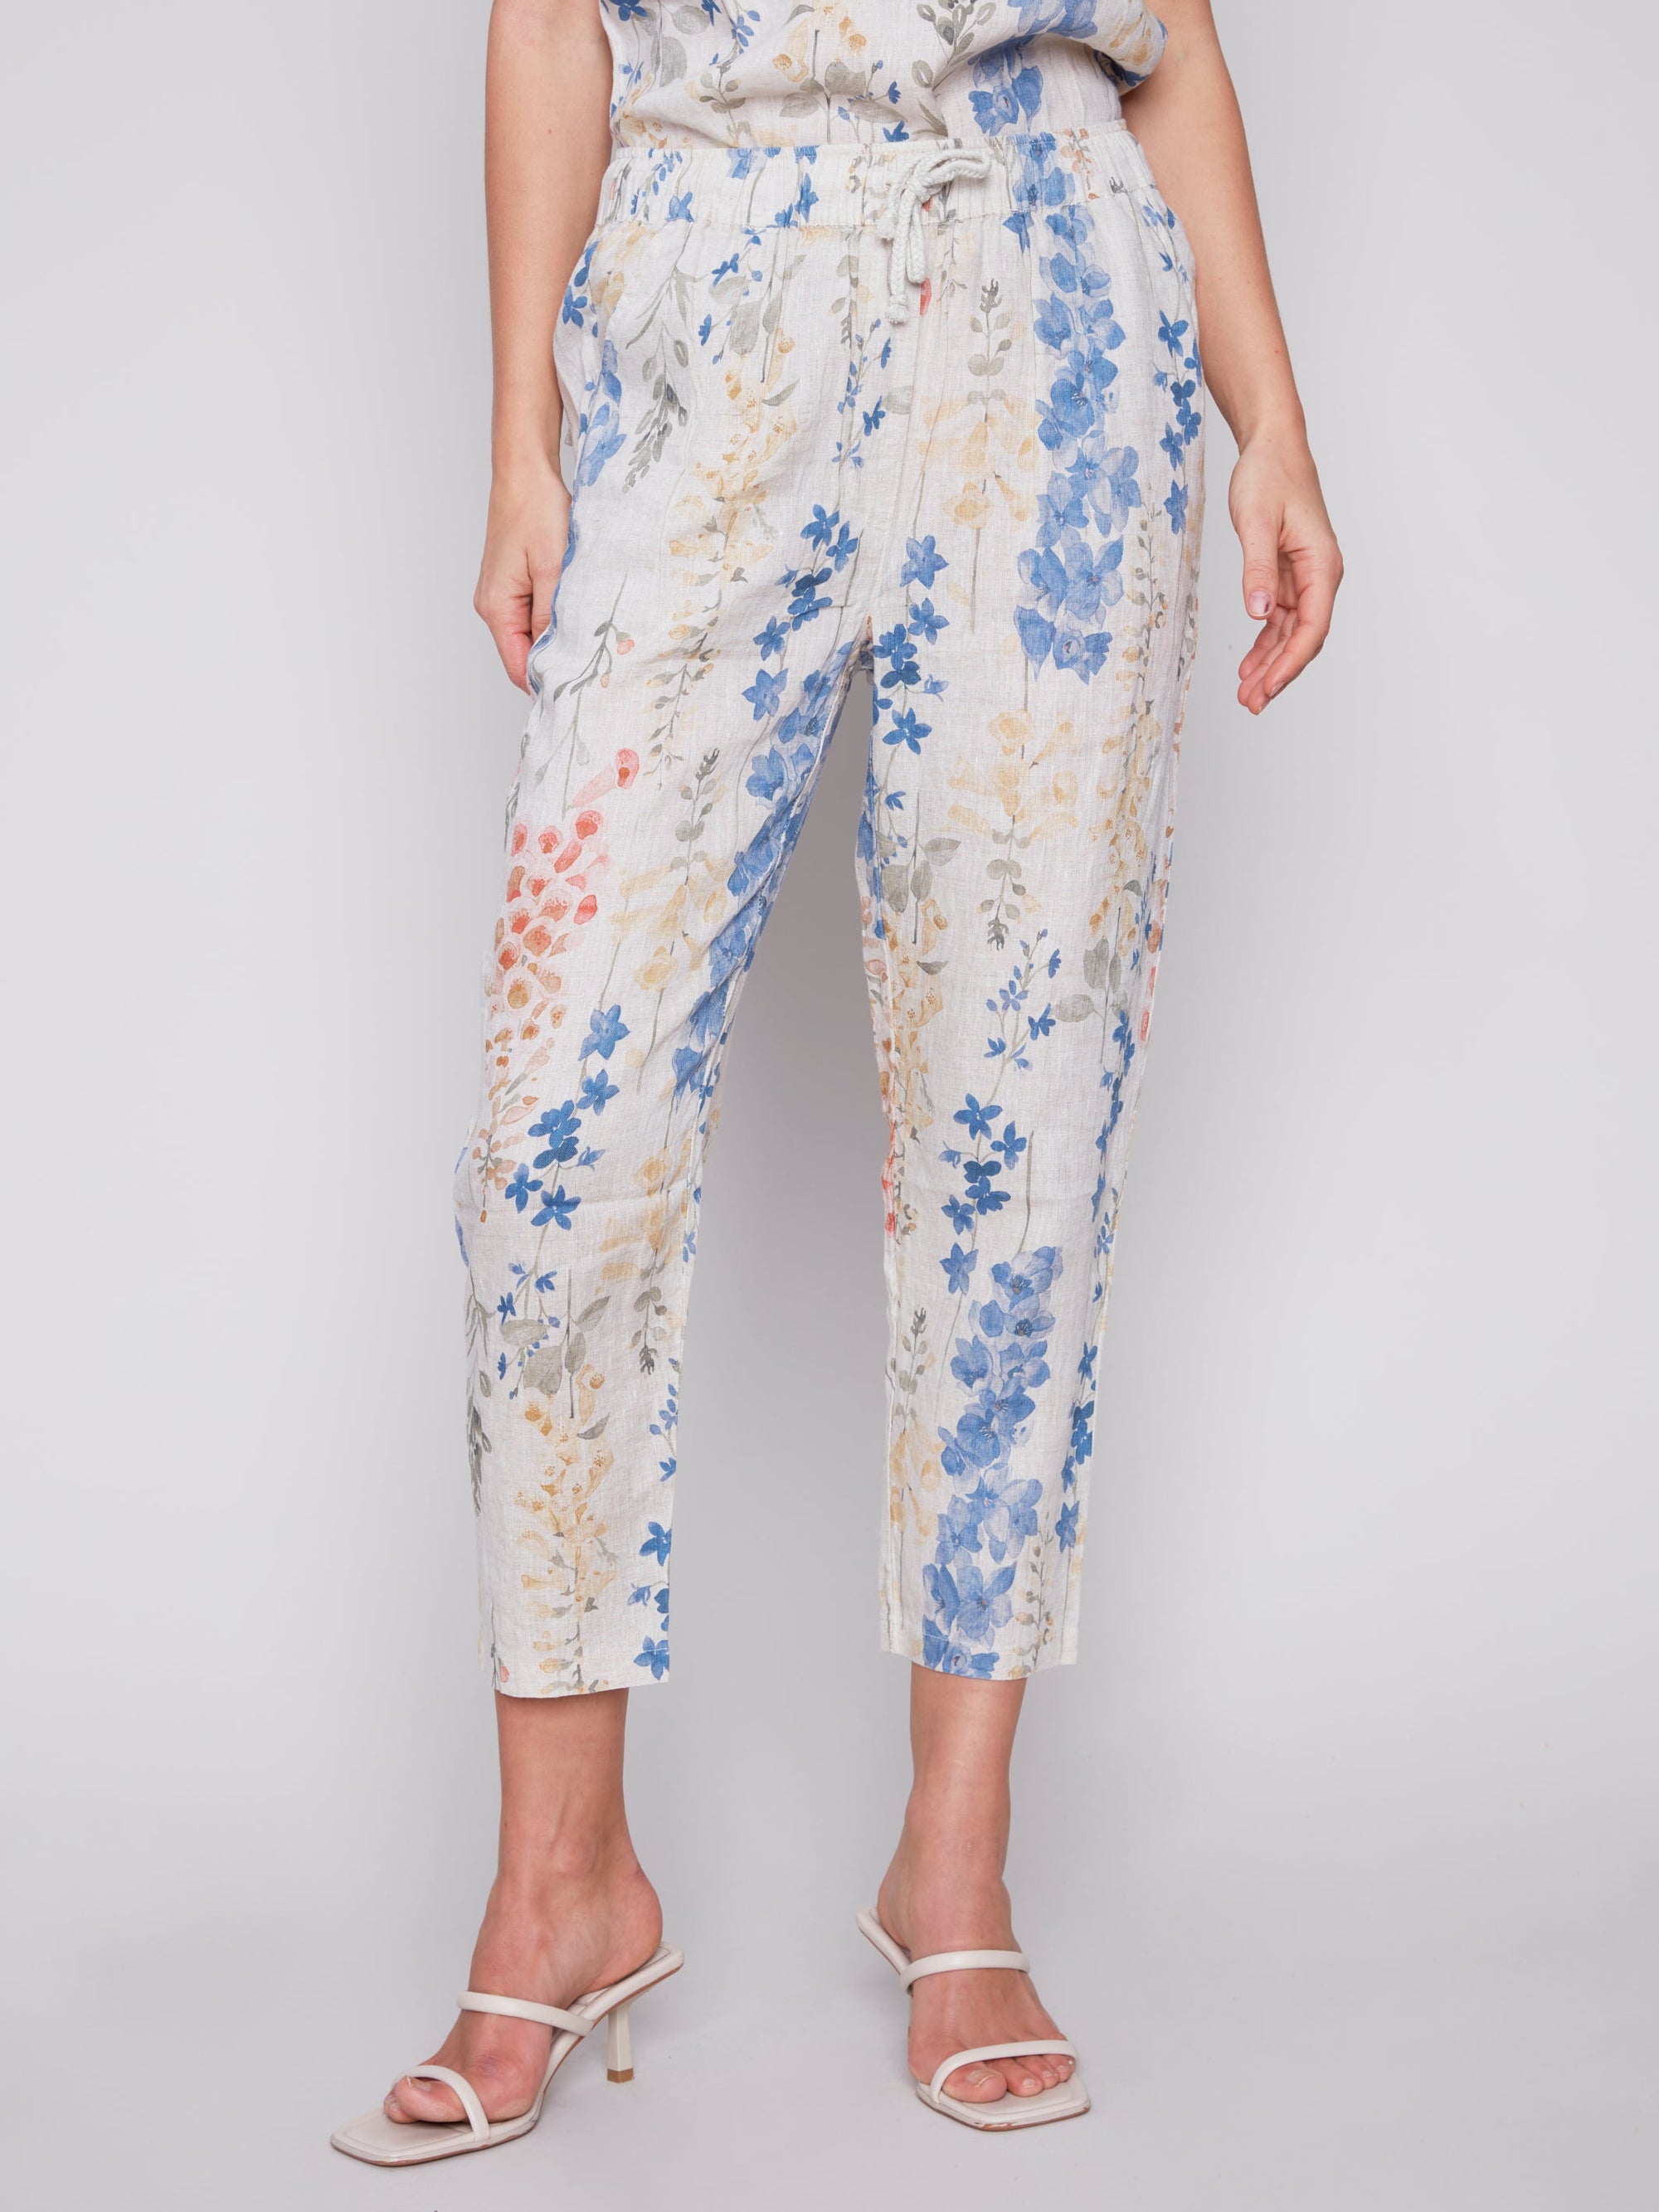 PRINTED LINEN PULL ON PANT-Bottoms-CHARLIE B-SMALL-GARDEN-Coriander